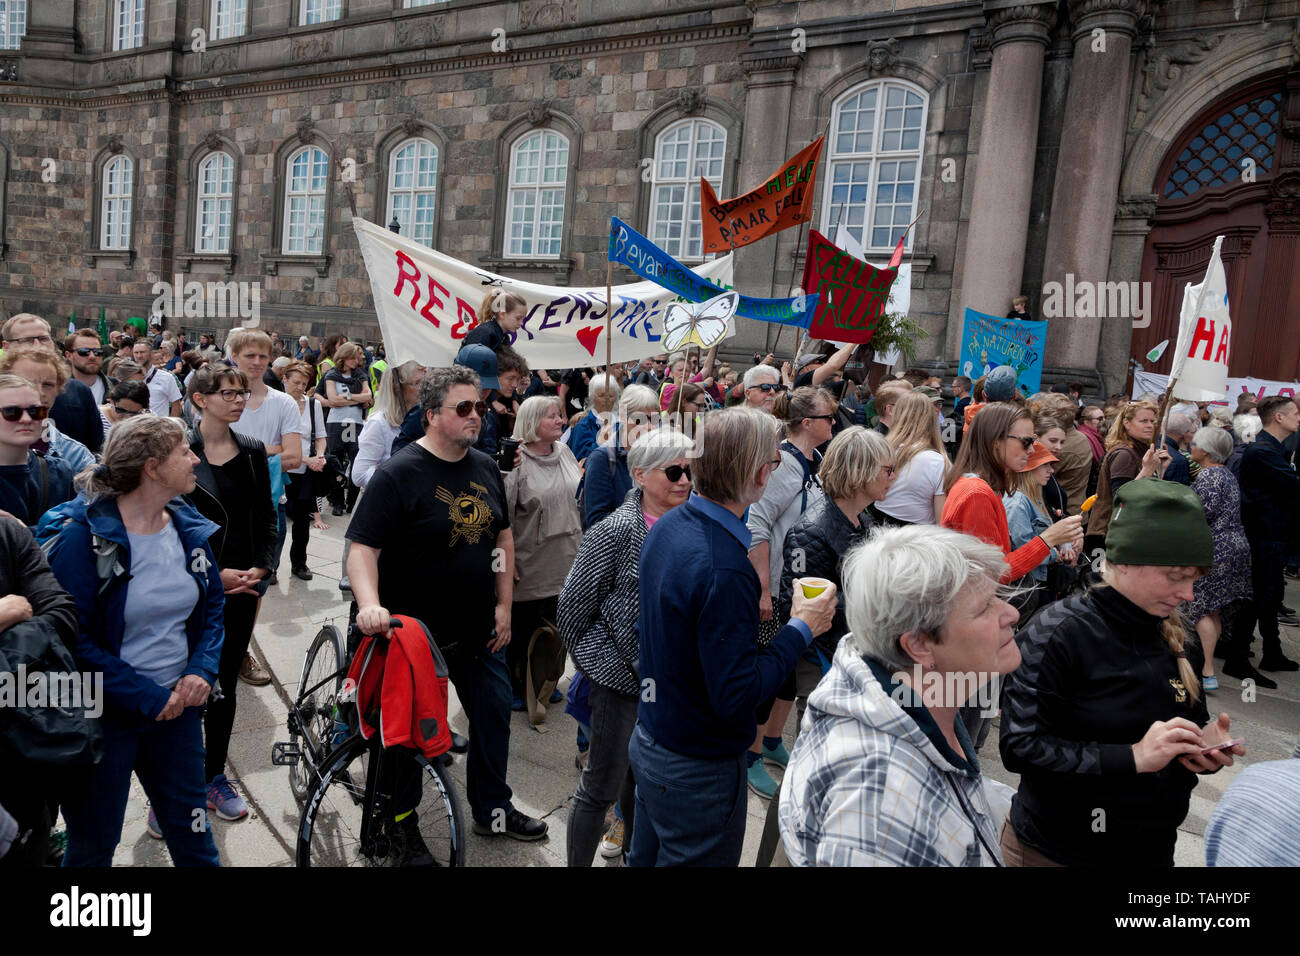 Copenhagen, Denmark. 25th May, 2019. About 30,000 people take part in the People's Climate March, the largest climate march yet in Denmark. Demonstration and speeches at Christiansborg Palace Square in front of the Danish parliament. Speeches by, among others, Danish politicians and Swedish 16 year old climate activist Greta Thunberg. Many Danish politicians from most political parties are present, interest probably enhanced by the electoral campaign for the upcoming EU Parliament election in Denmark tomorrow and the Danish general election on 5th June this year. Credit: Niels Quist/Alamy. Stock Photo